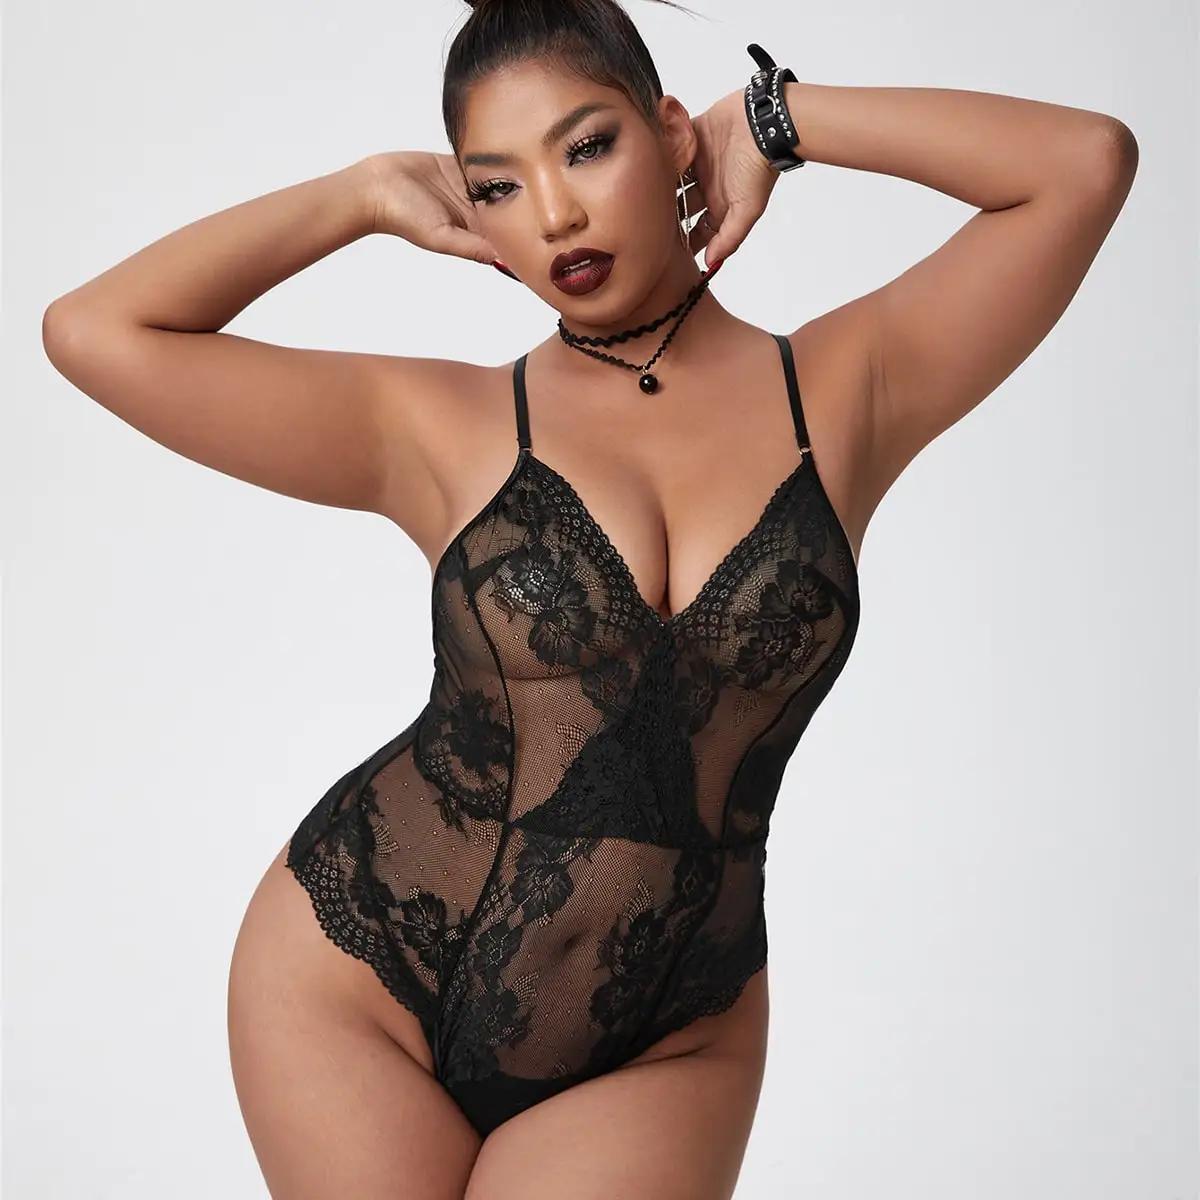 Lingerie For Women - Women Porn Taste Lingerie Hot Erotic Baby Dolls Dress Teddy Lenceria  Interest Mujer Babydoll Underwear Sentiment Costumes Plus - Buy Women Lace  Overalls For Women Transparent Body Women Clothes Female Backless Sexy